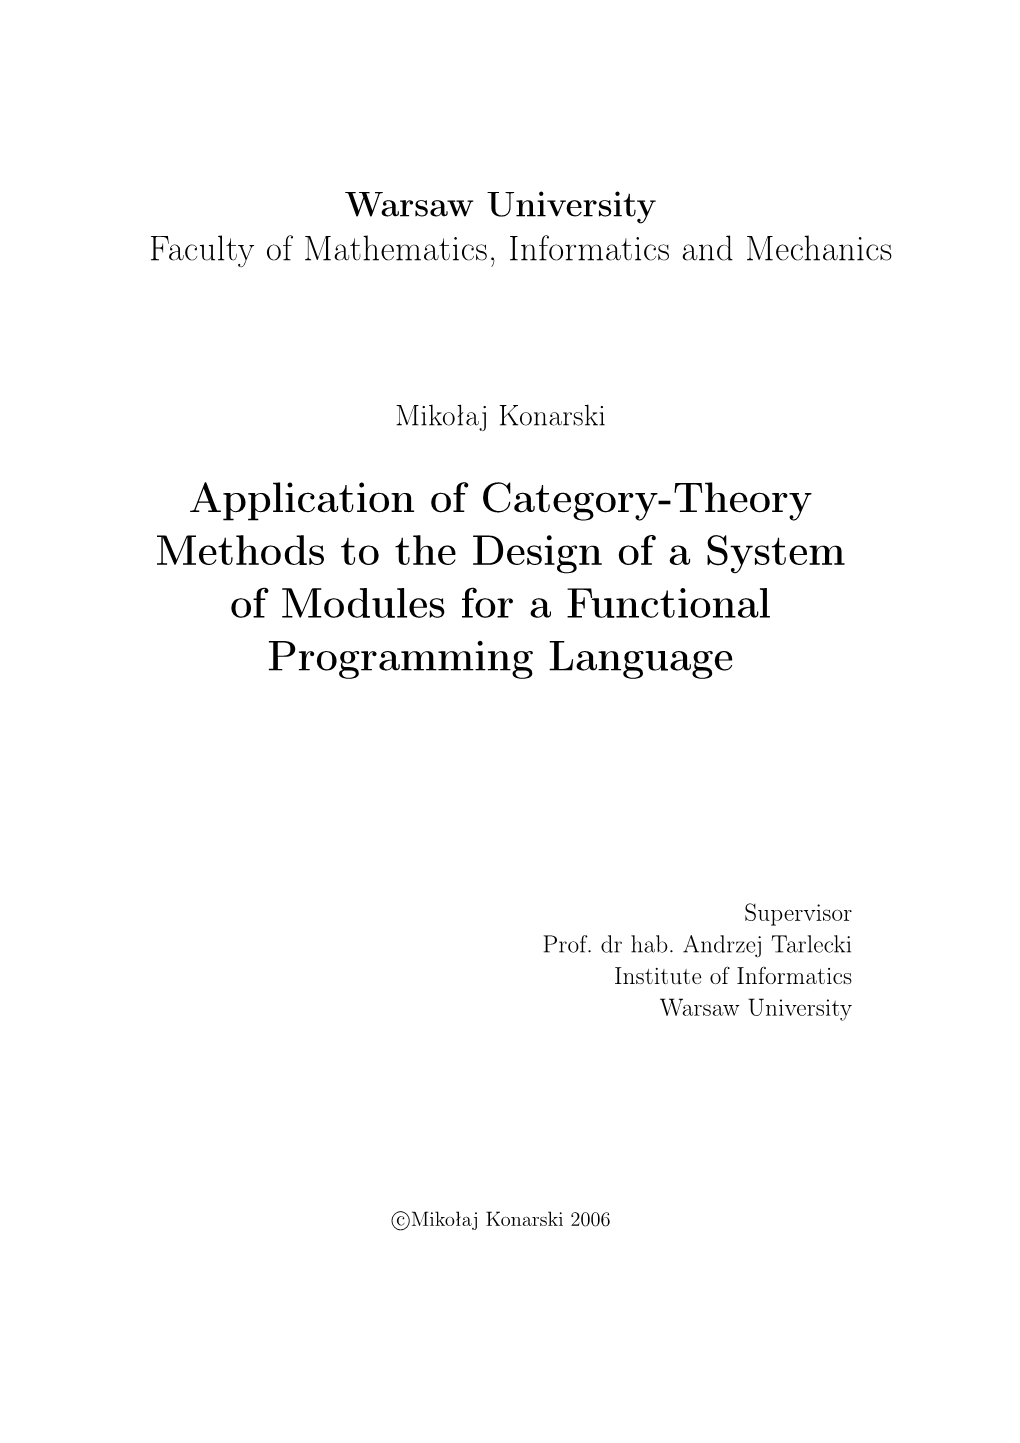 Application of Category-Theory Methods to the Design of a System of Modules for a Functional Programming Language